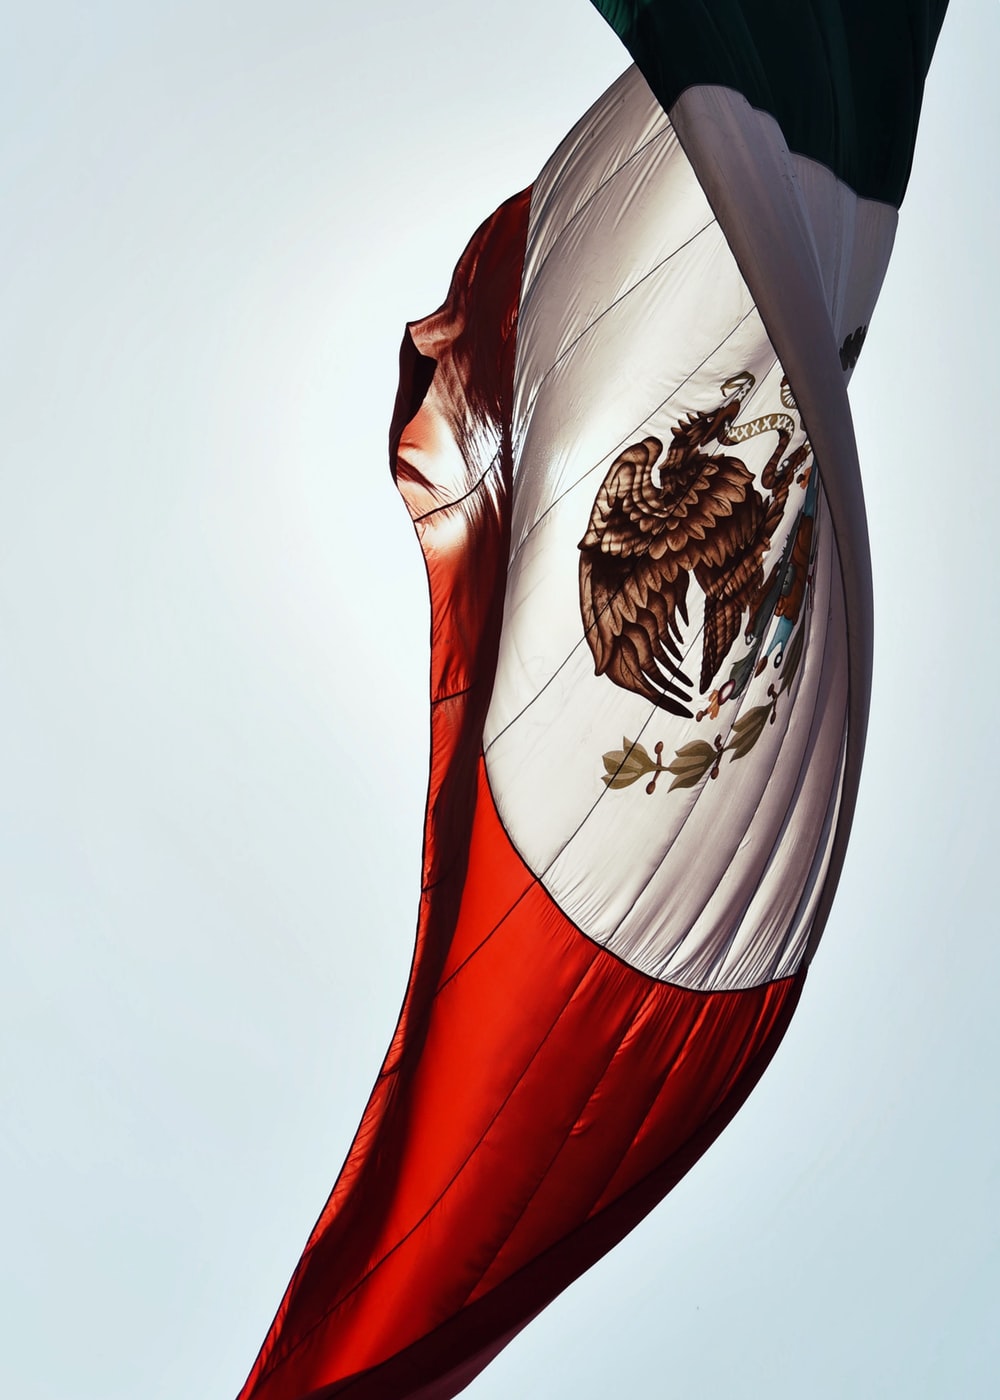 Best Mexican Flag Picture [HD]. Download Free Image